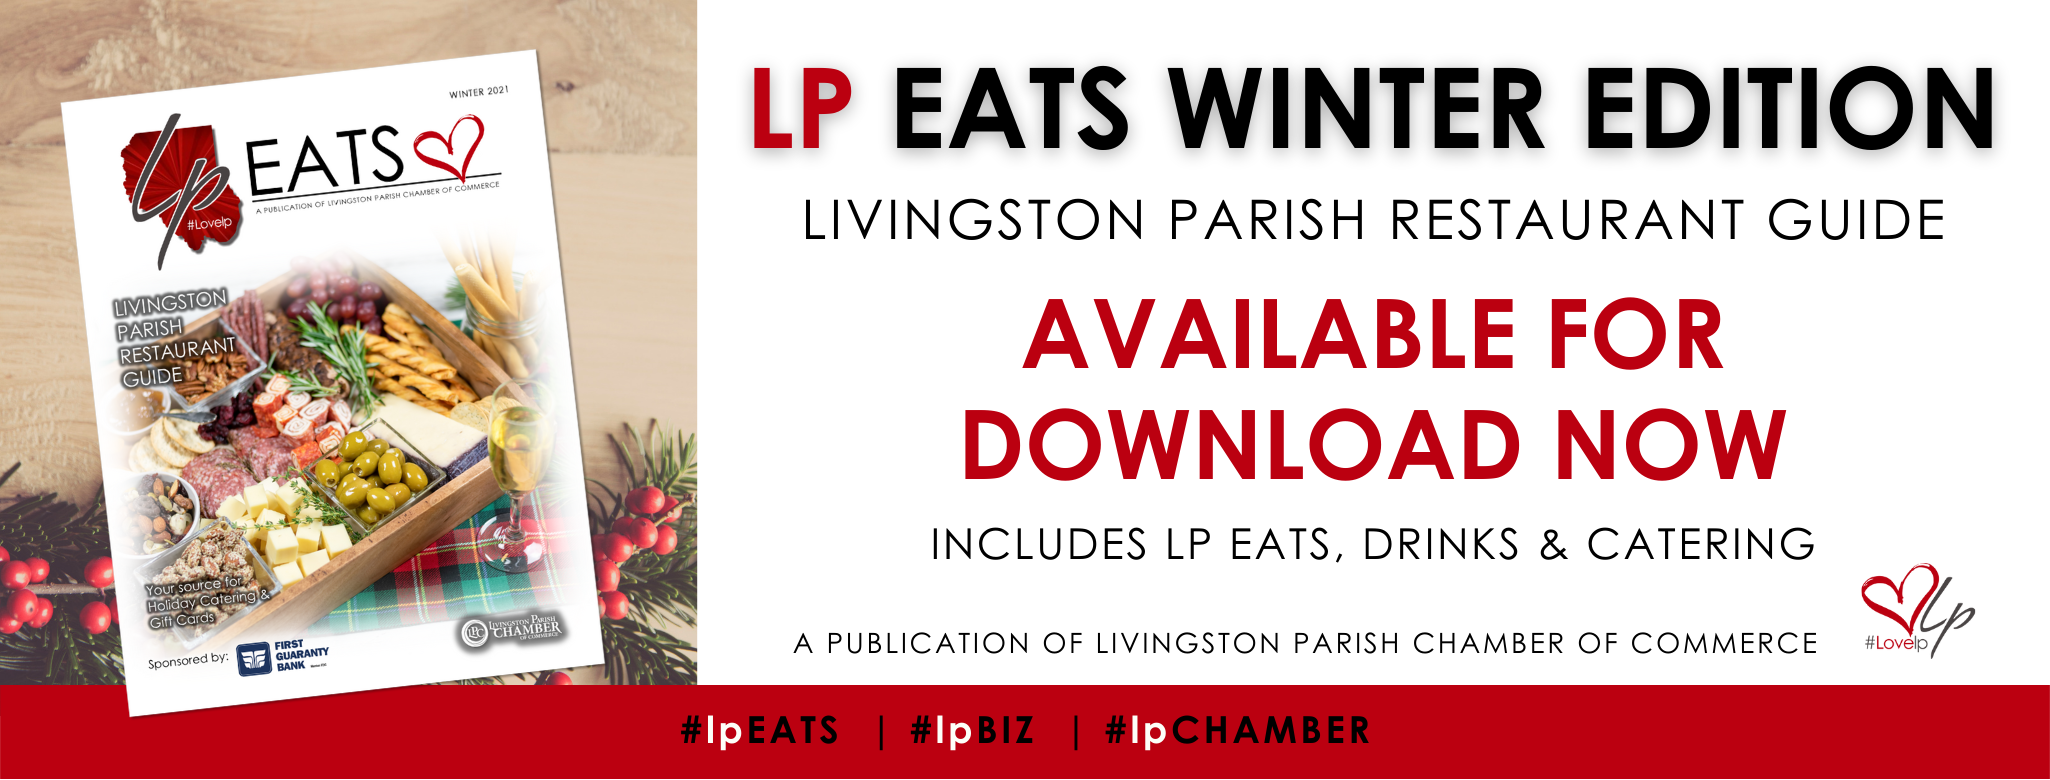 LP Eats Restaurant Guide - Your Source for Holiday Catering & Gift Cards